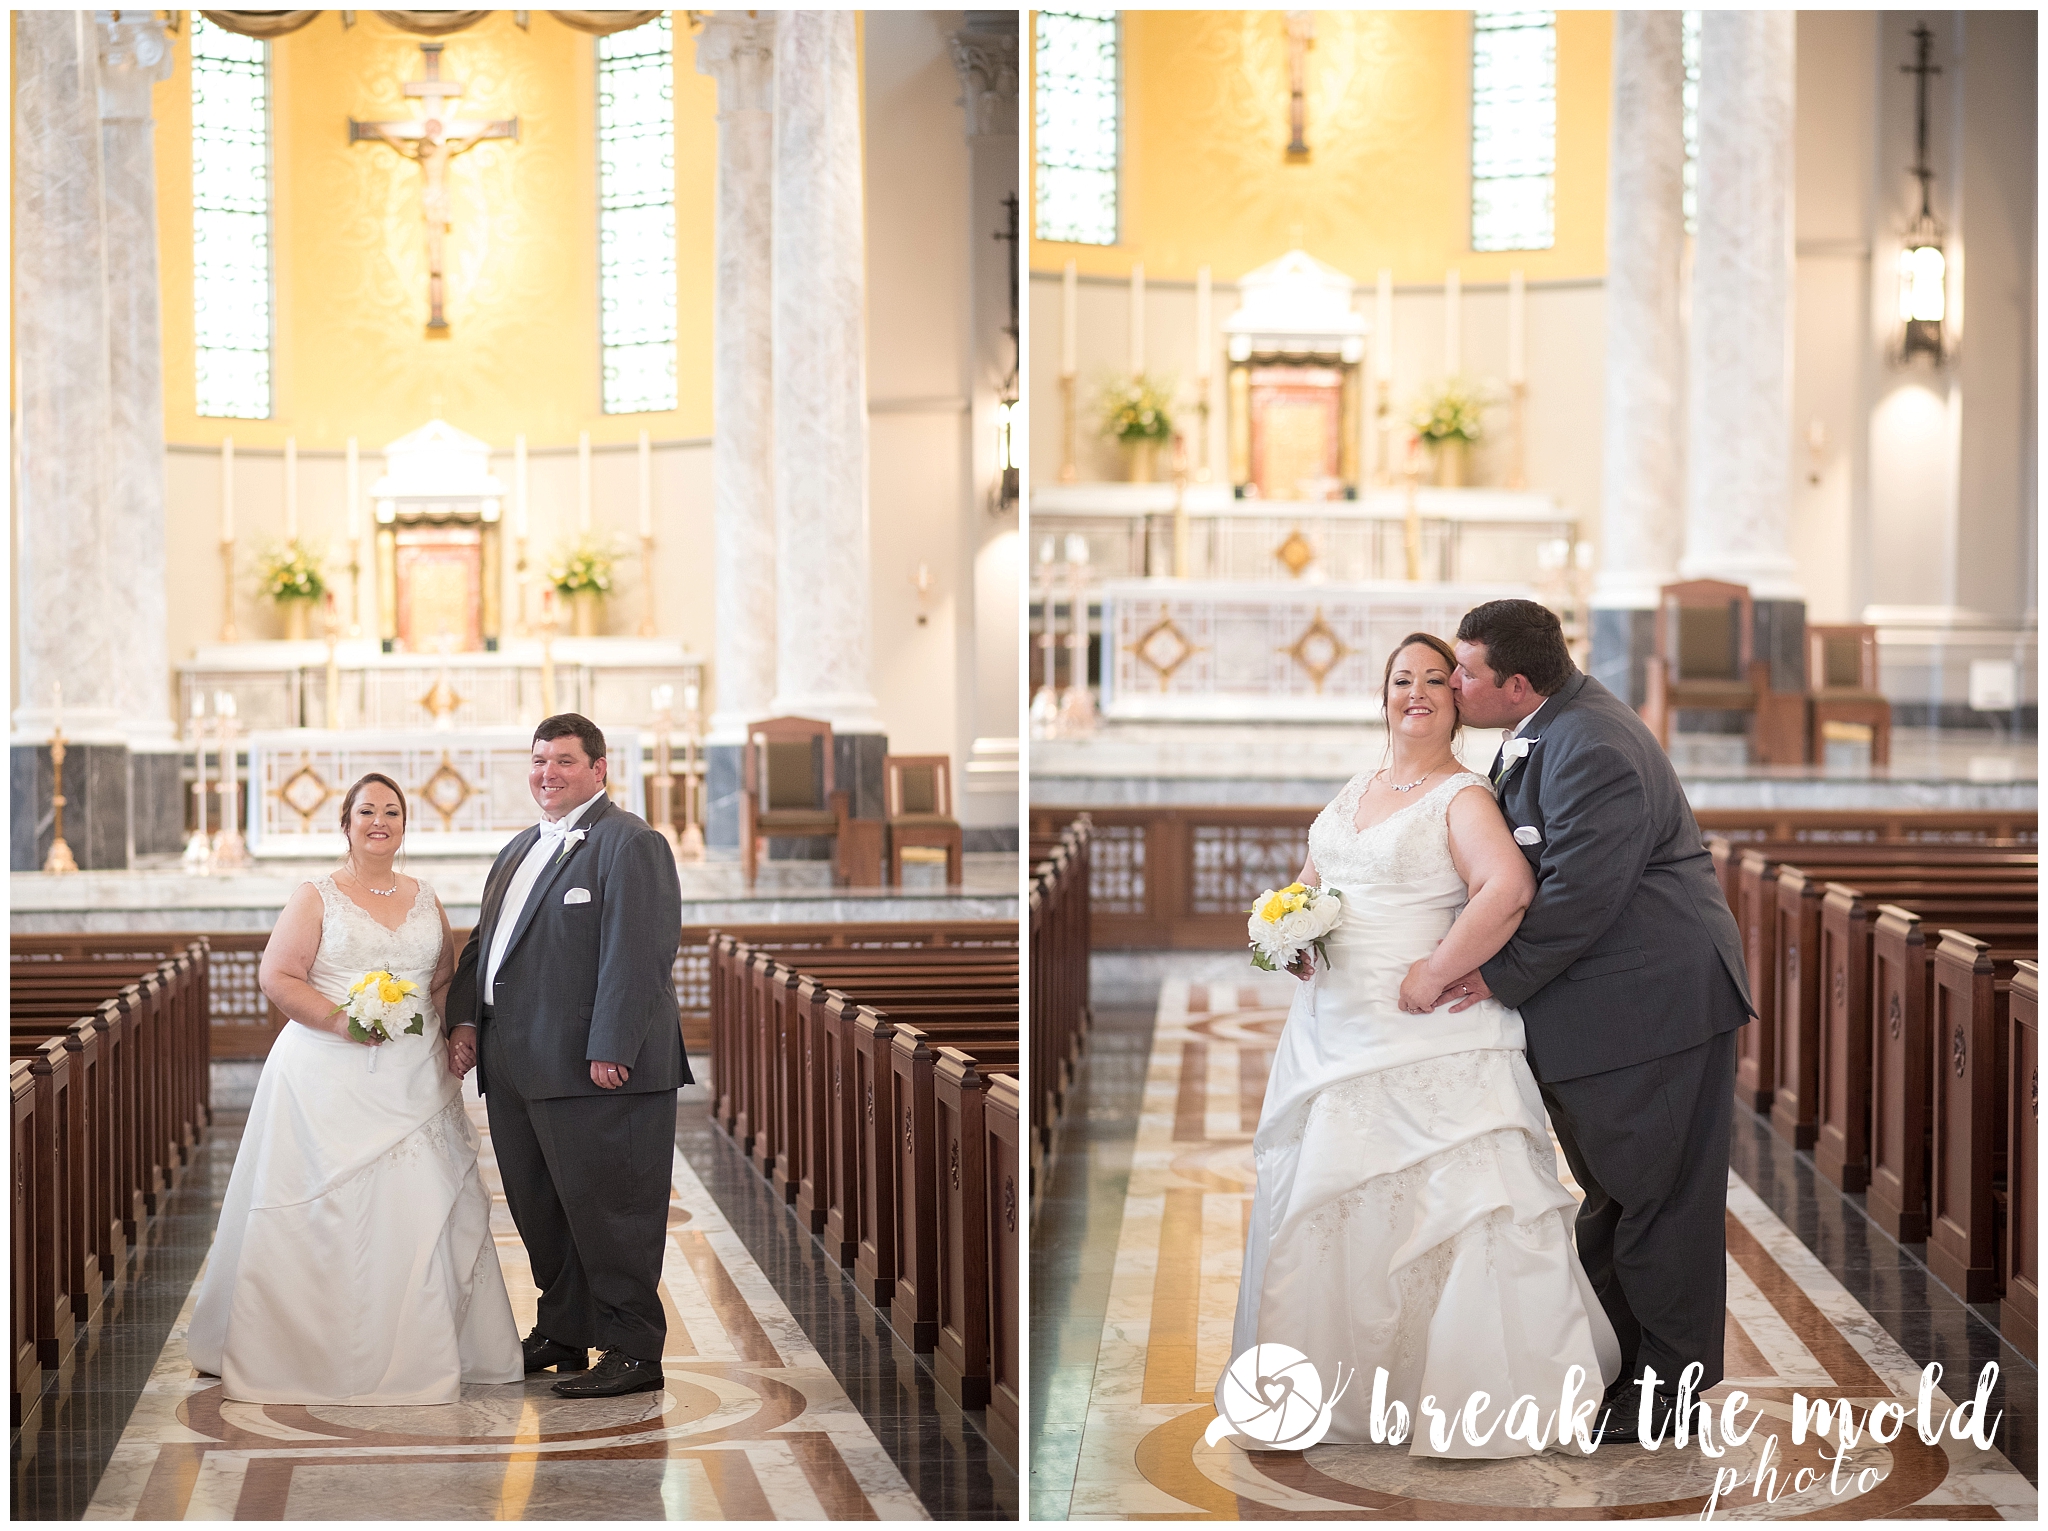 wedding-knoxville-sacred-heart-cathedral-photographer-break-the-mold-photo-feature-affordable_0818.jpg